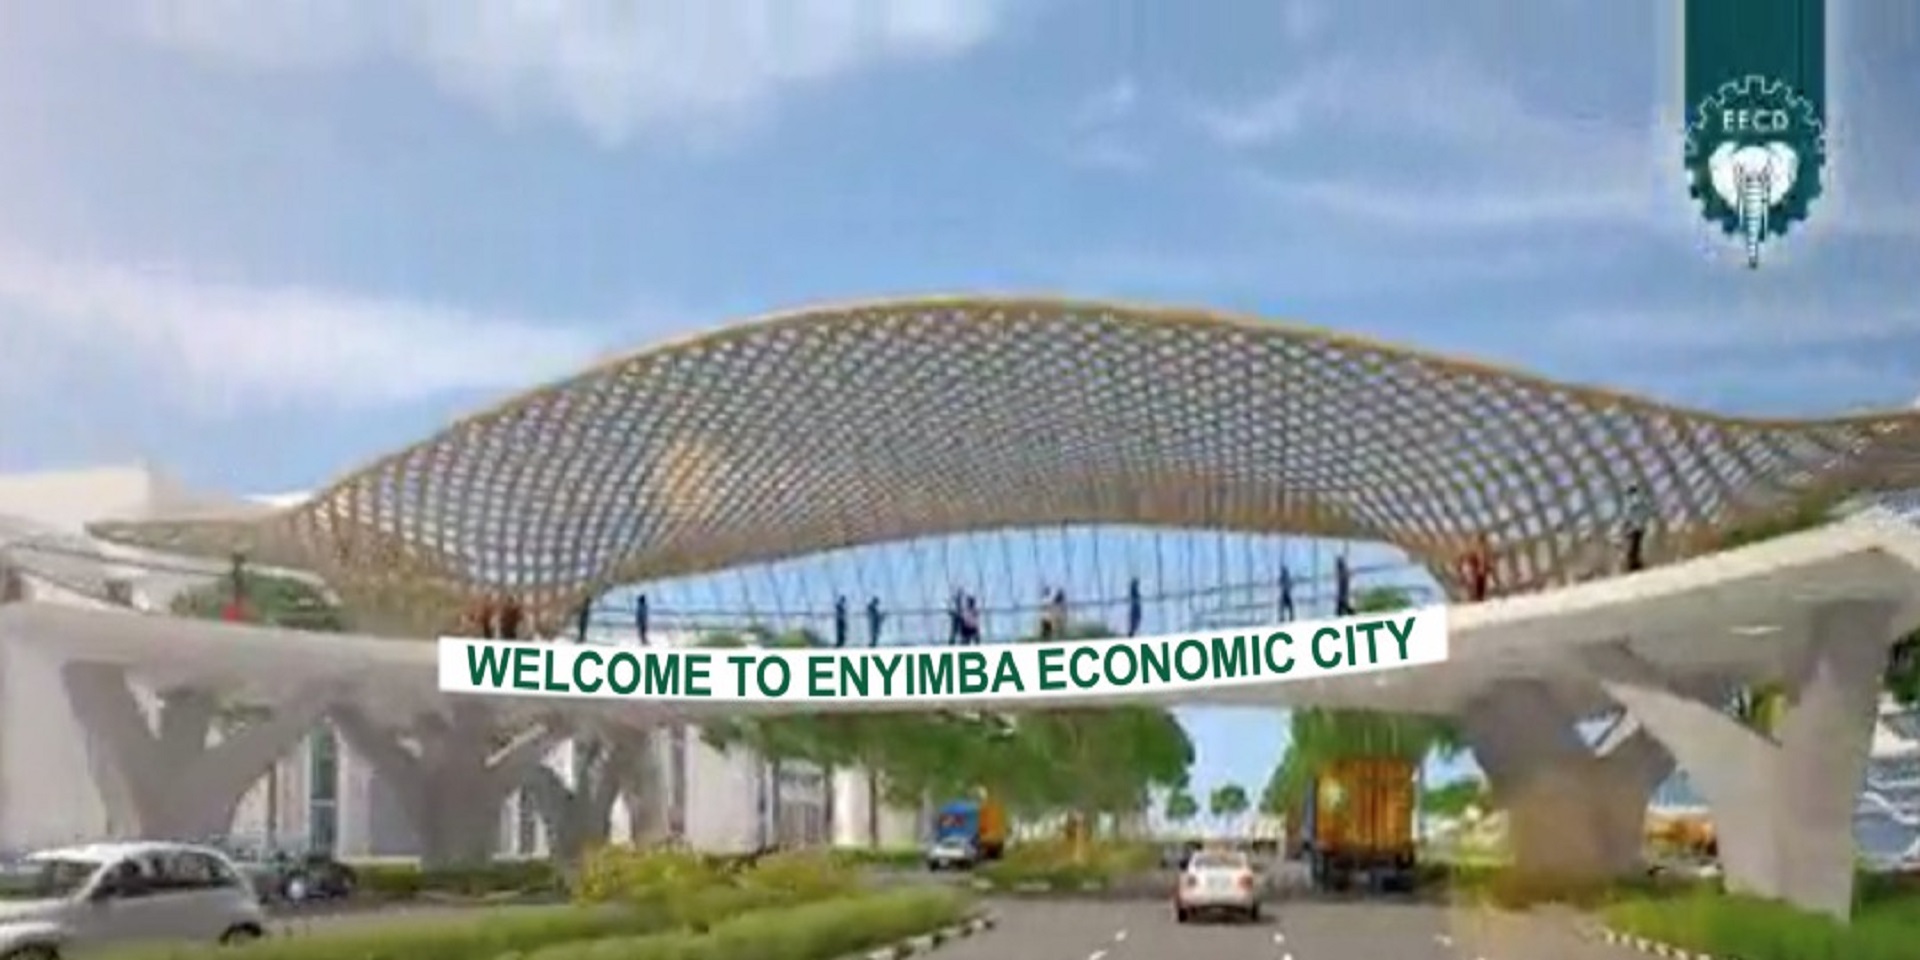 President Buhari And Governor Ikpeazu Signs Agreement To Establish Enyimba Economic City In Abia State 3